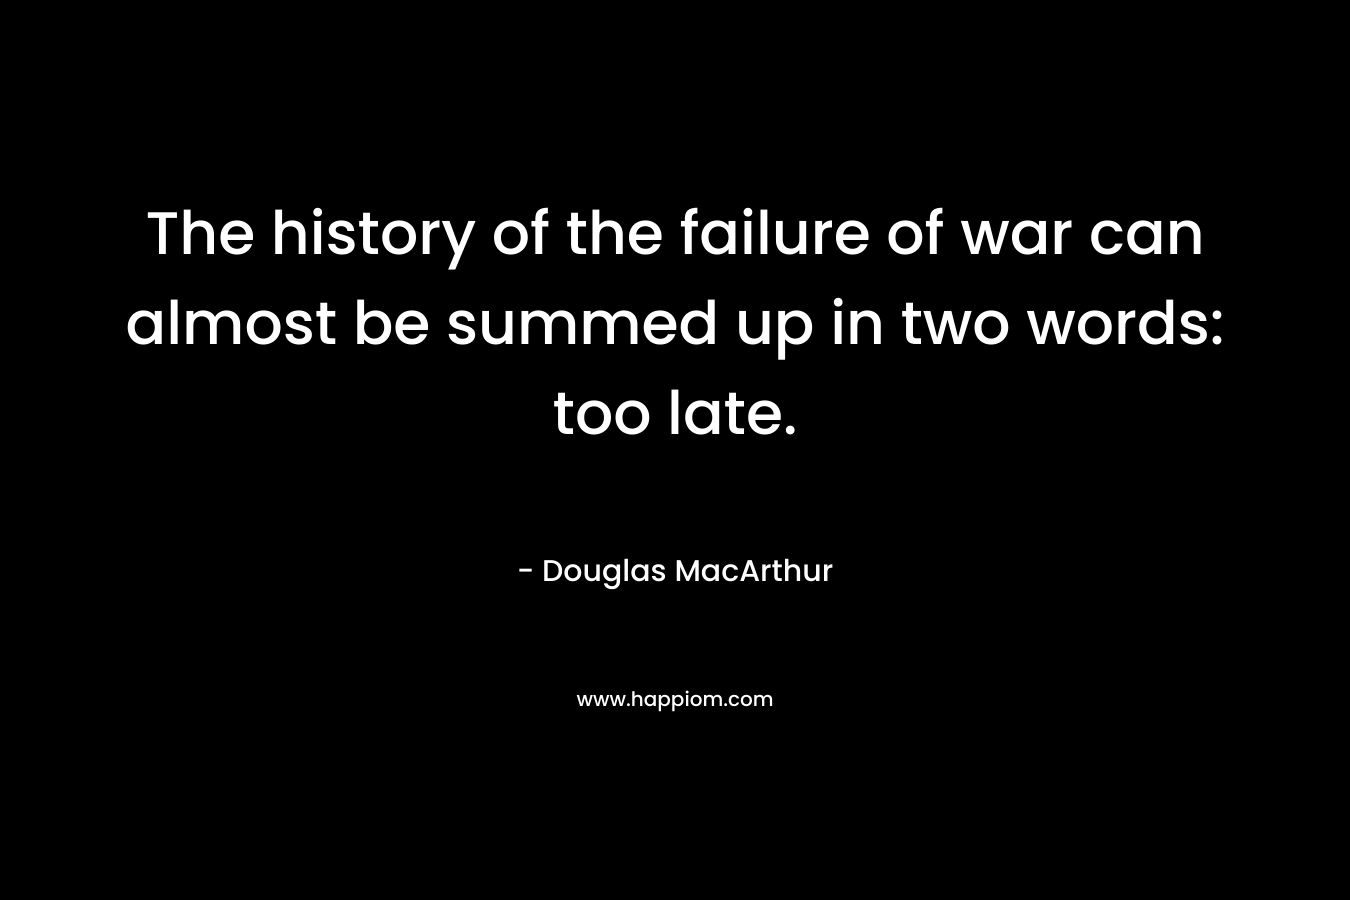 The history of the failure of war can almost be summed up in two words: too late.